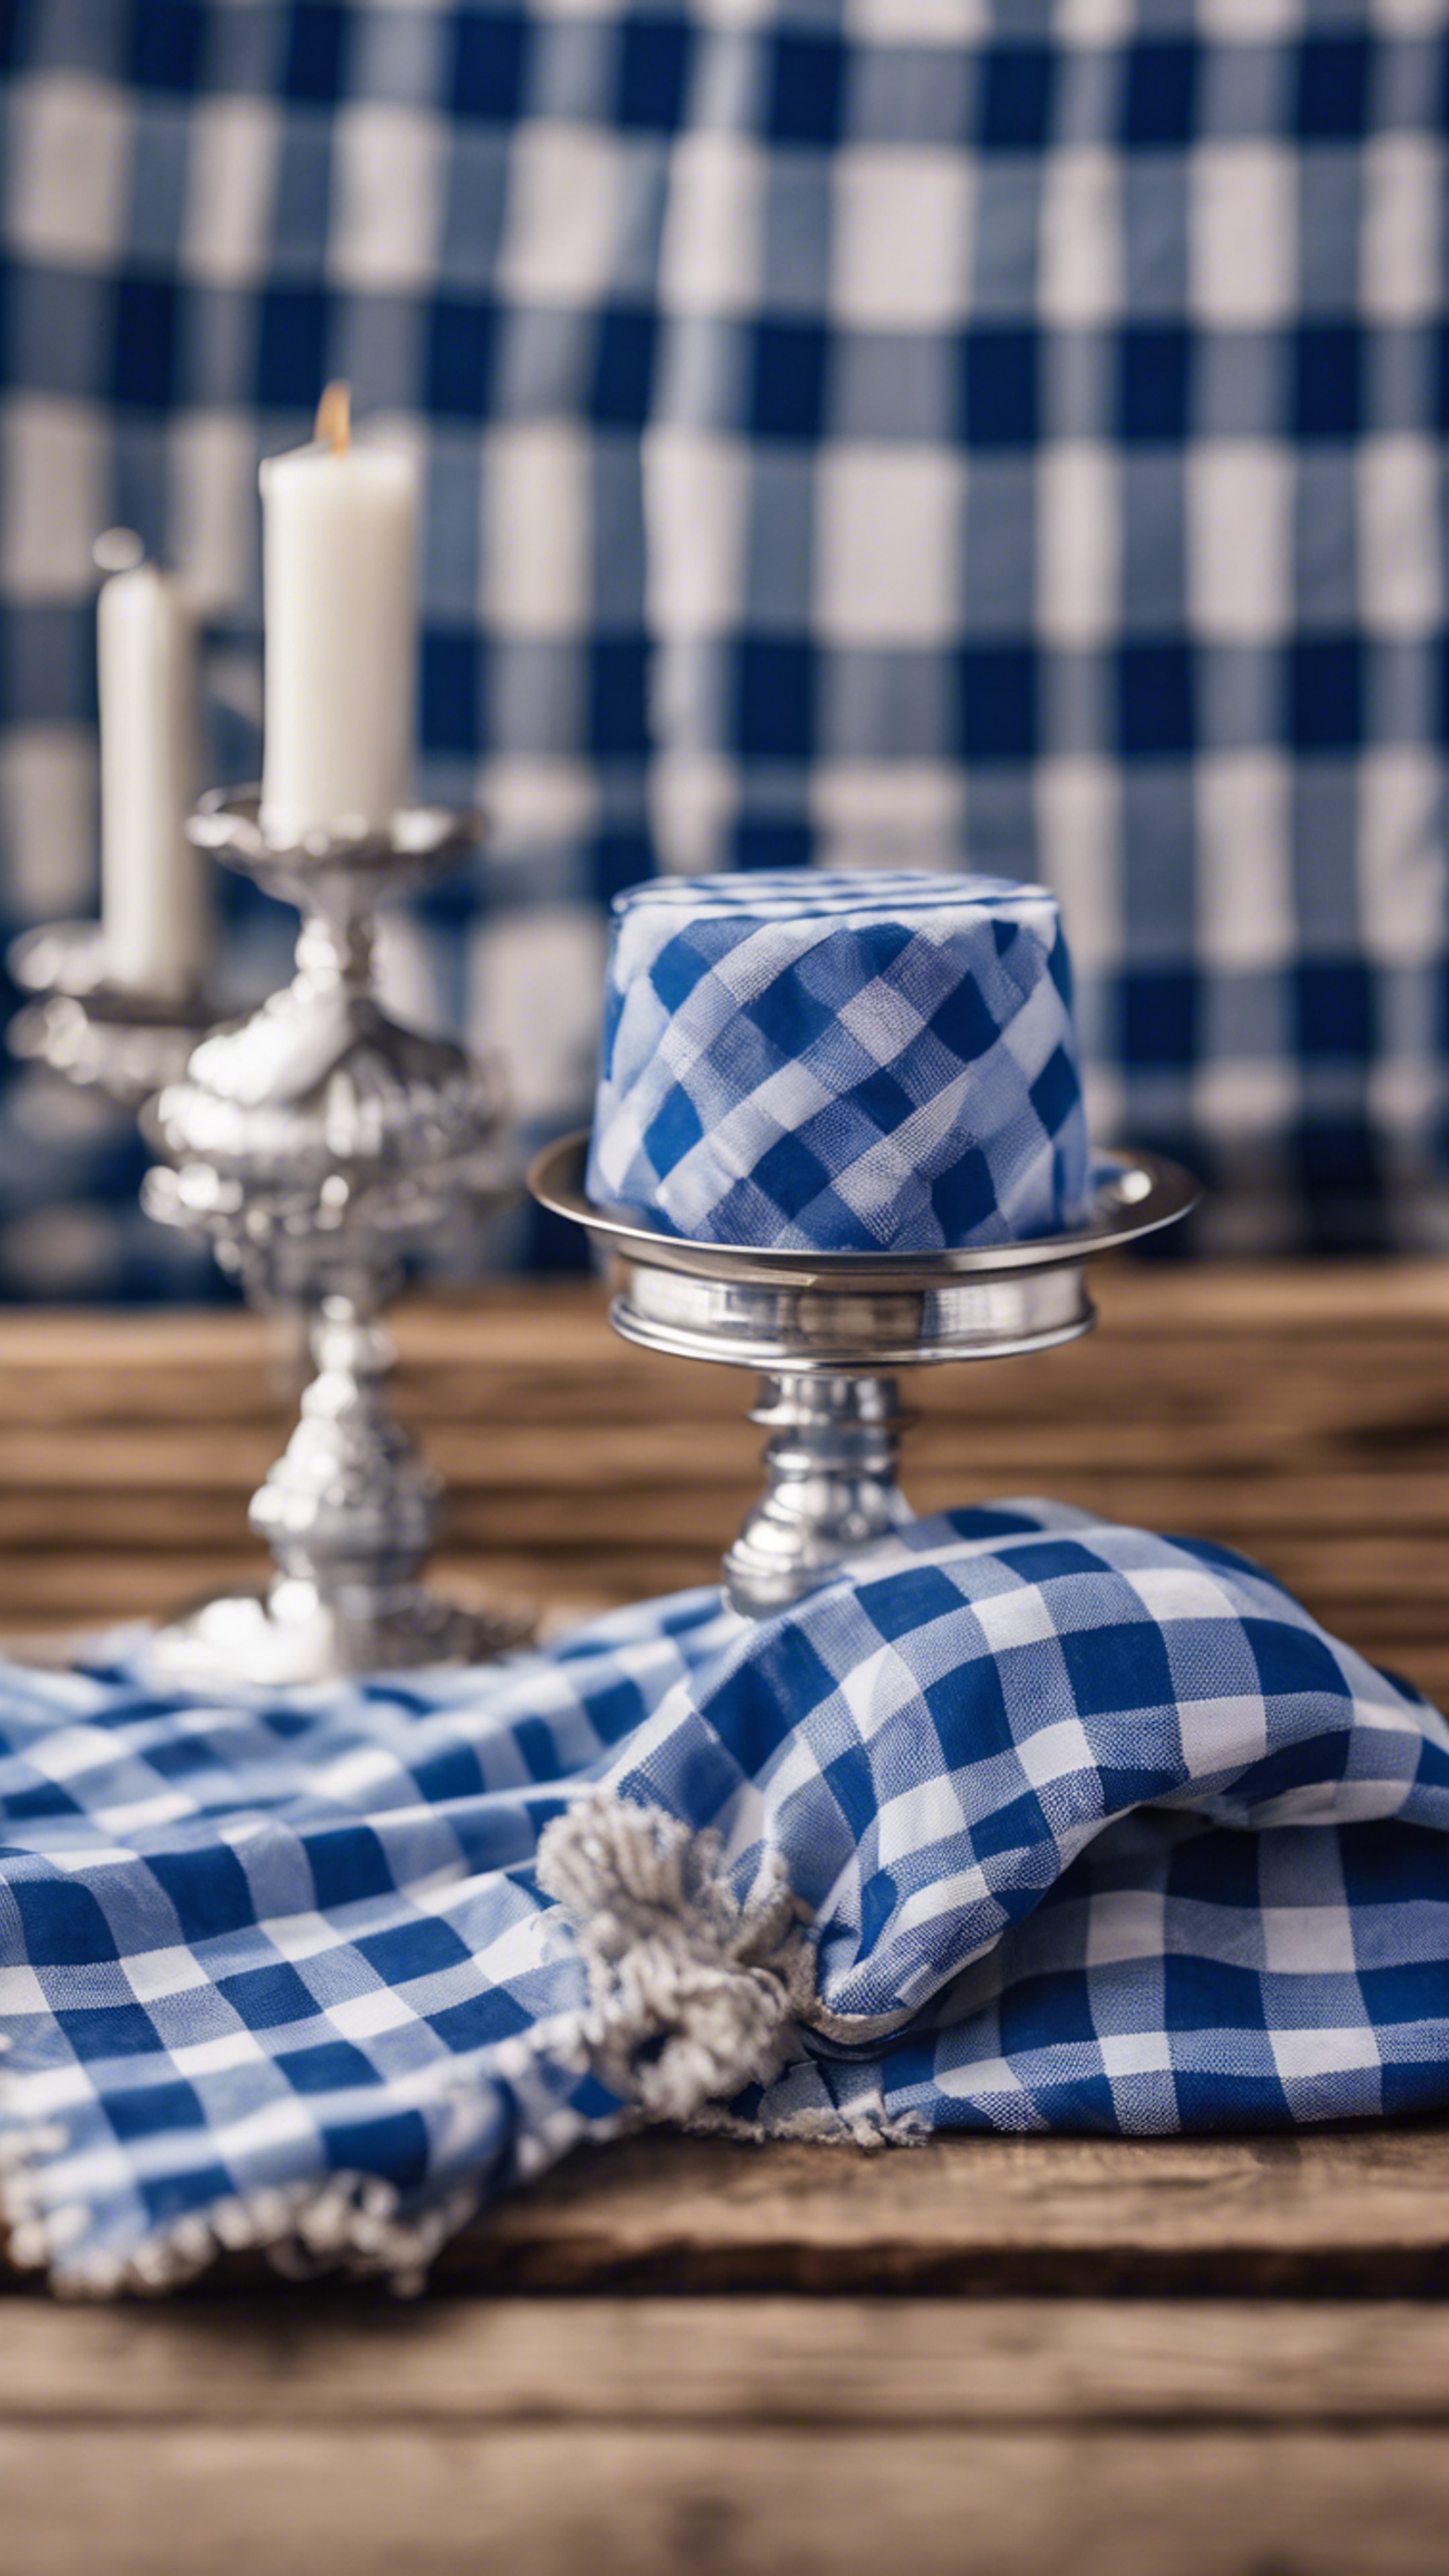 Classic blue checkered gingham fabric draped over a wooden table with a silver candelabra, evoking a preppy picnic scene. Tapeta[5483729deeeb4e2a9f91]